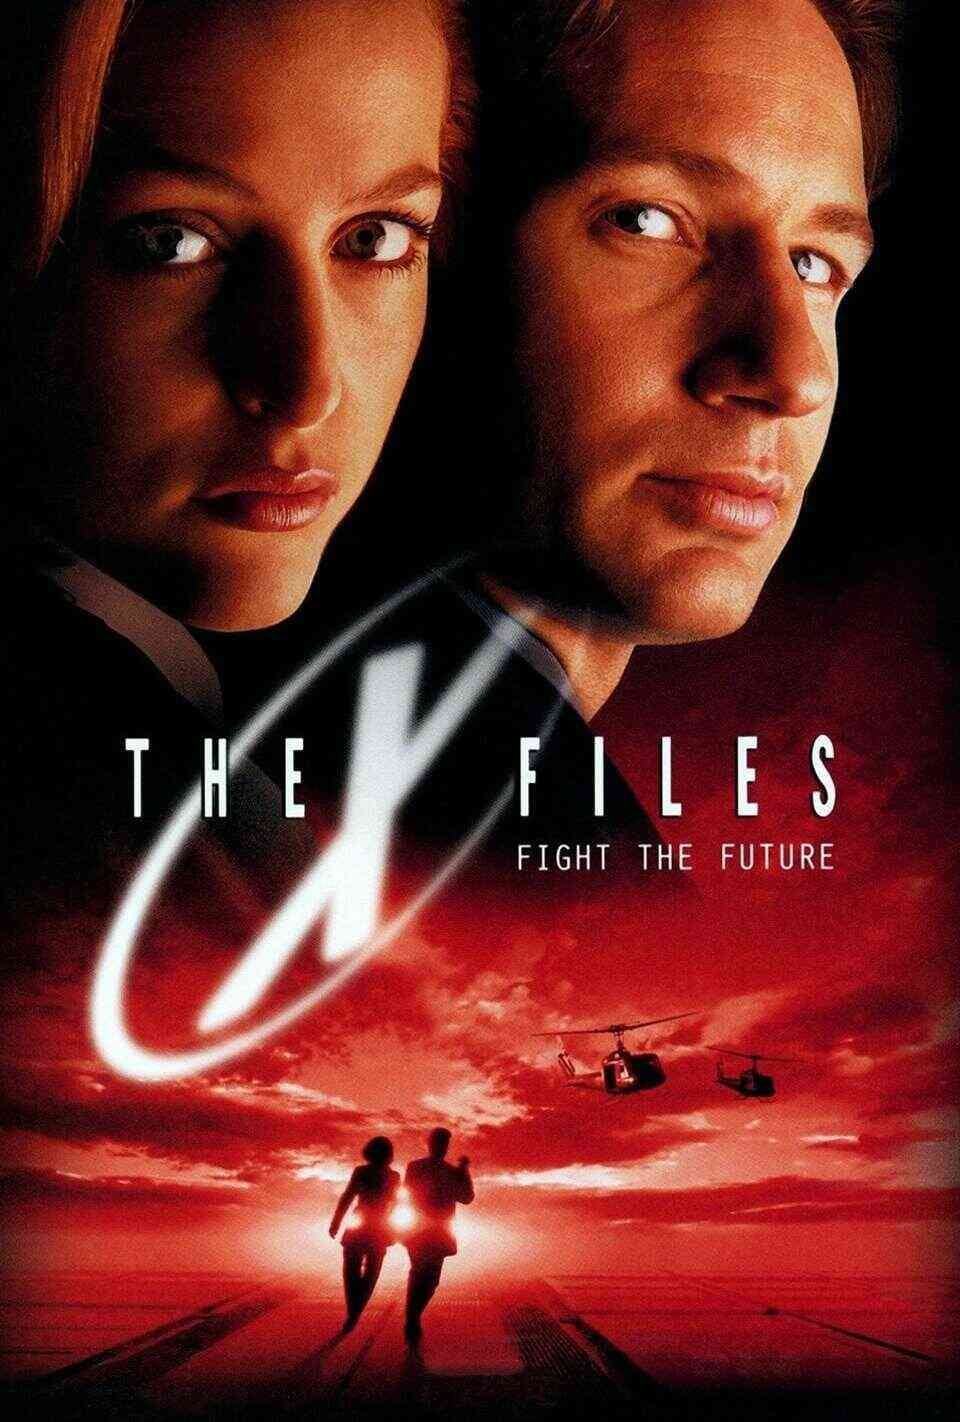 Read The X-Files (1998) screenplay (poster)